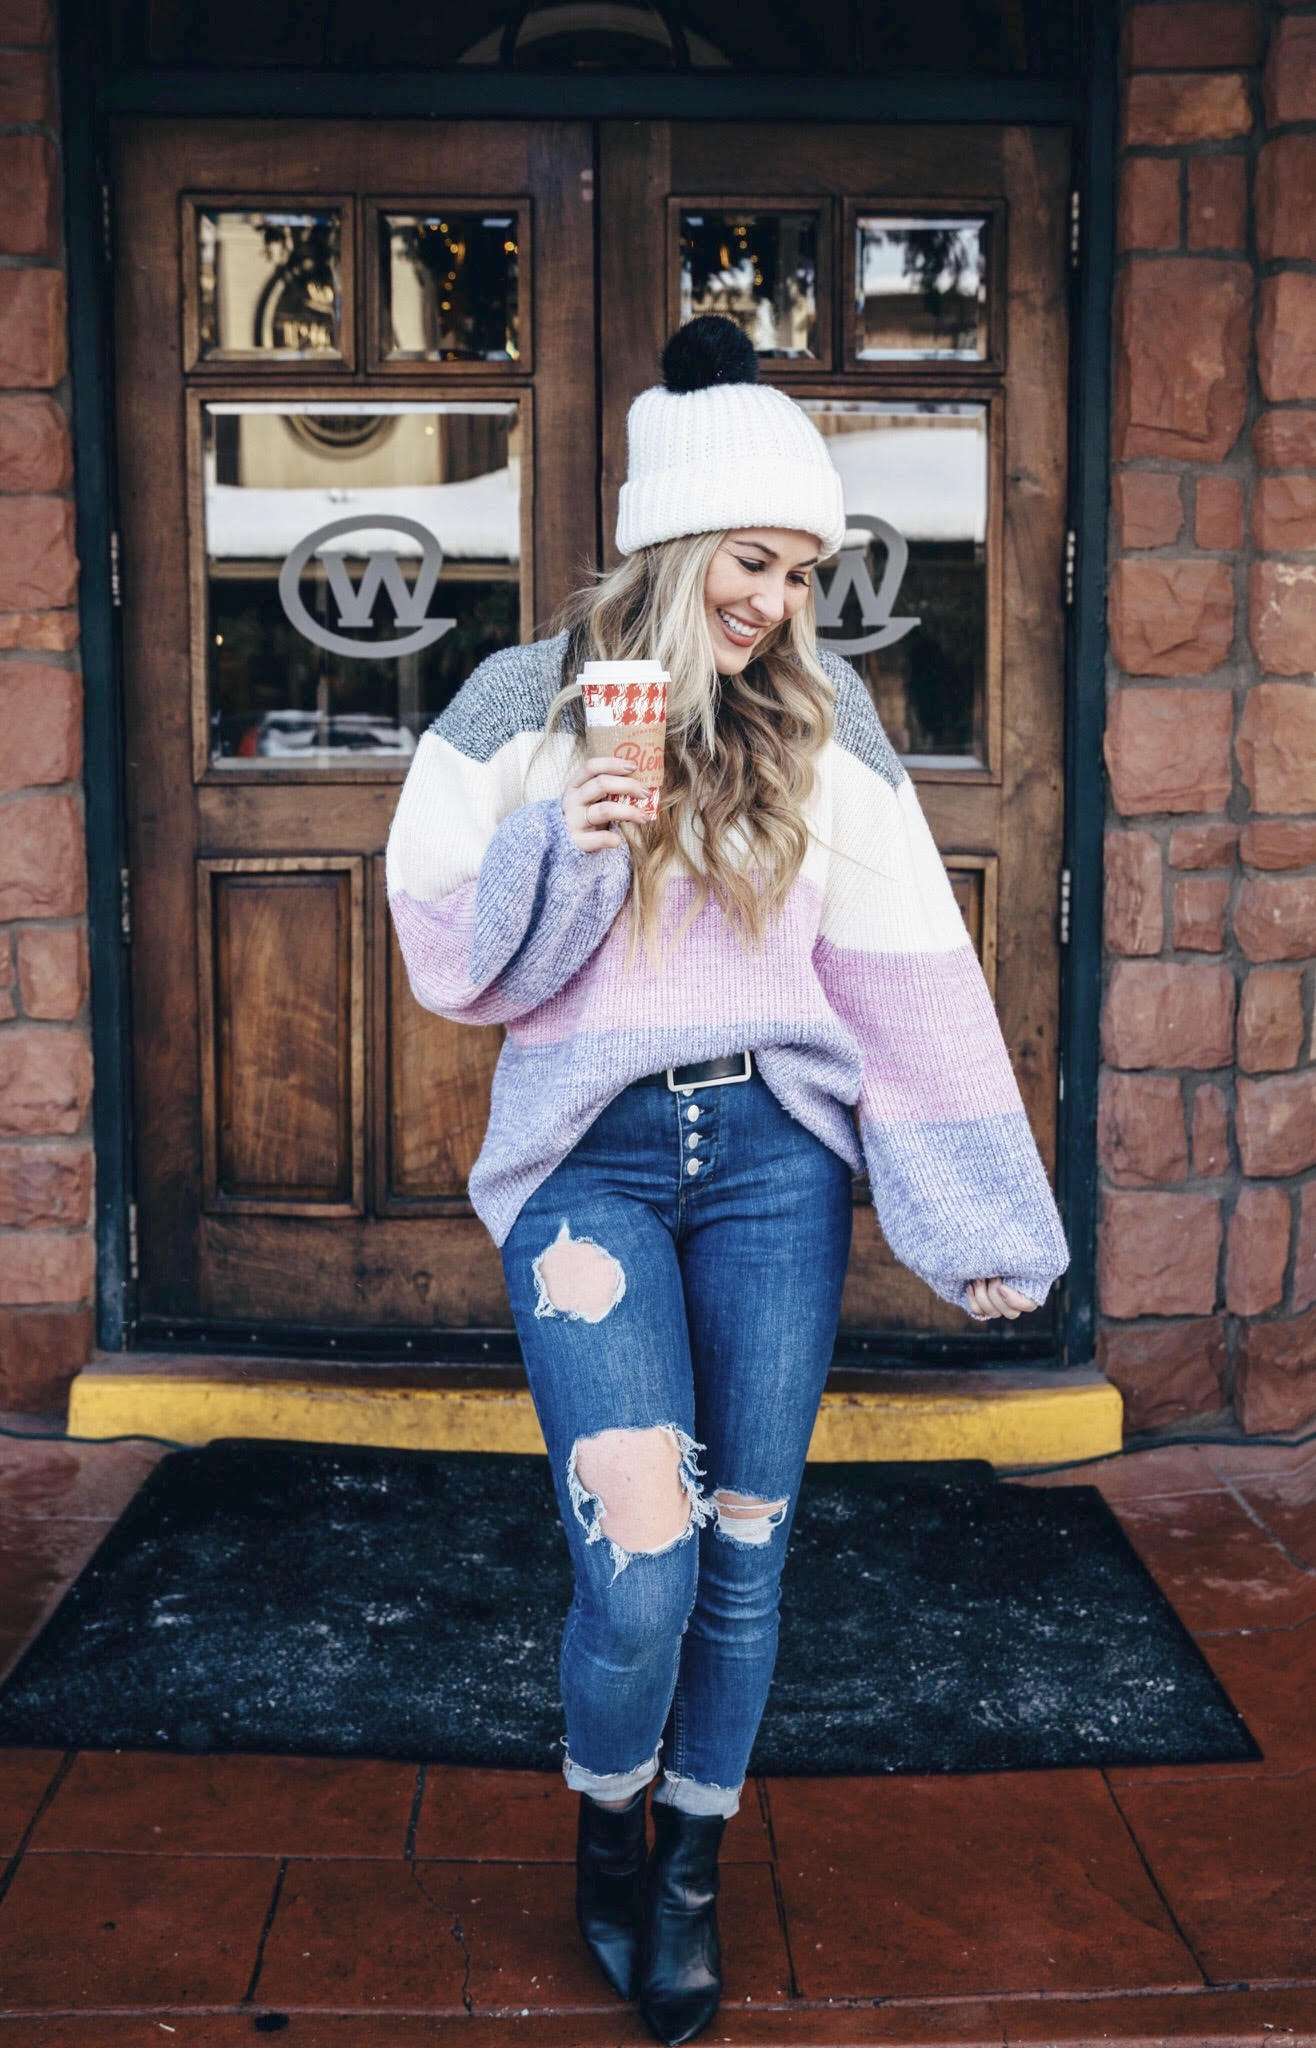 Pink Lily striped sweater styled by top US fashion blog, Walking in Memphis in High Heels: image of a woman wearing a Pink Lily striped sweater, Free People skinny jeans, Double faux fur pom pom beanie and Sole Society sole booties